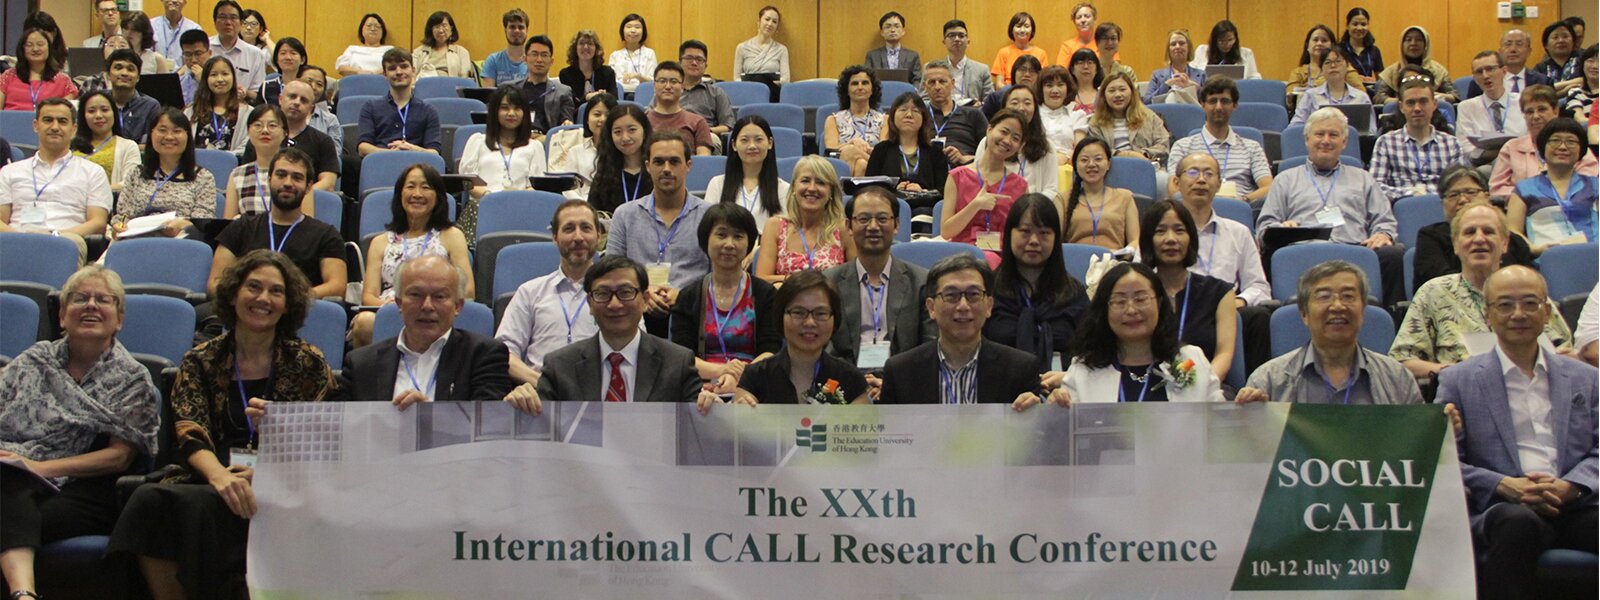 XXth International CALL Research Conference 2019